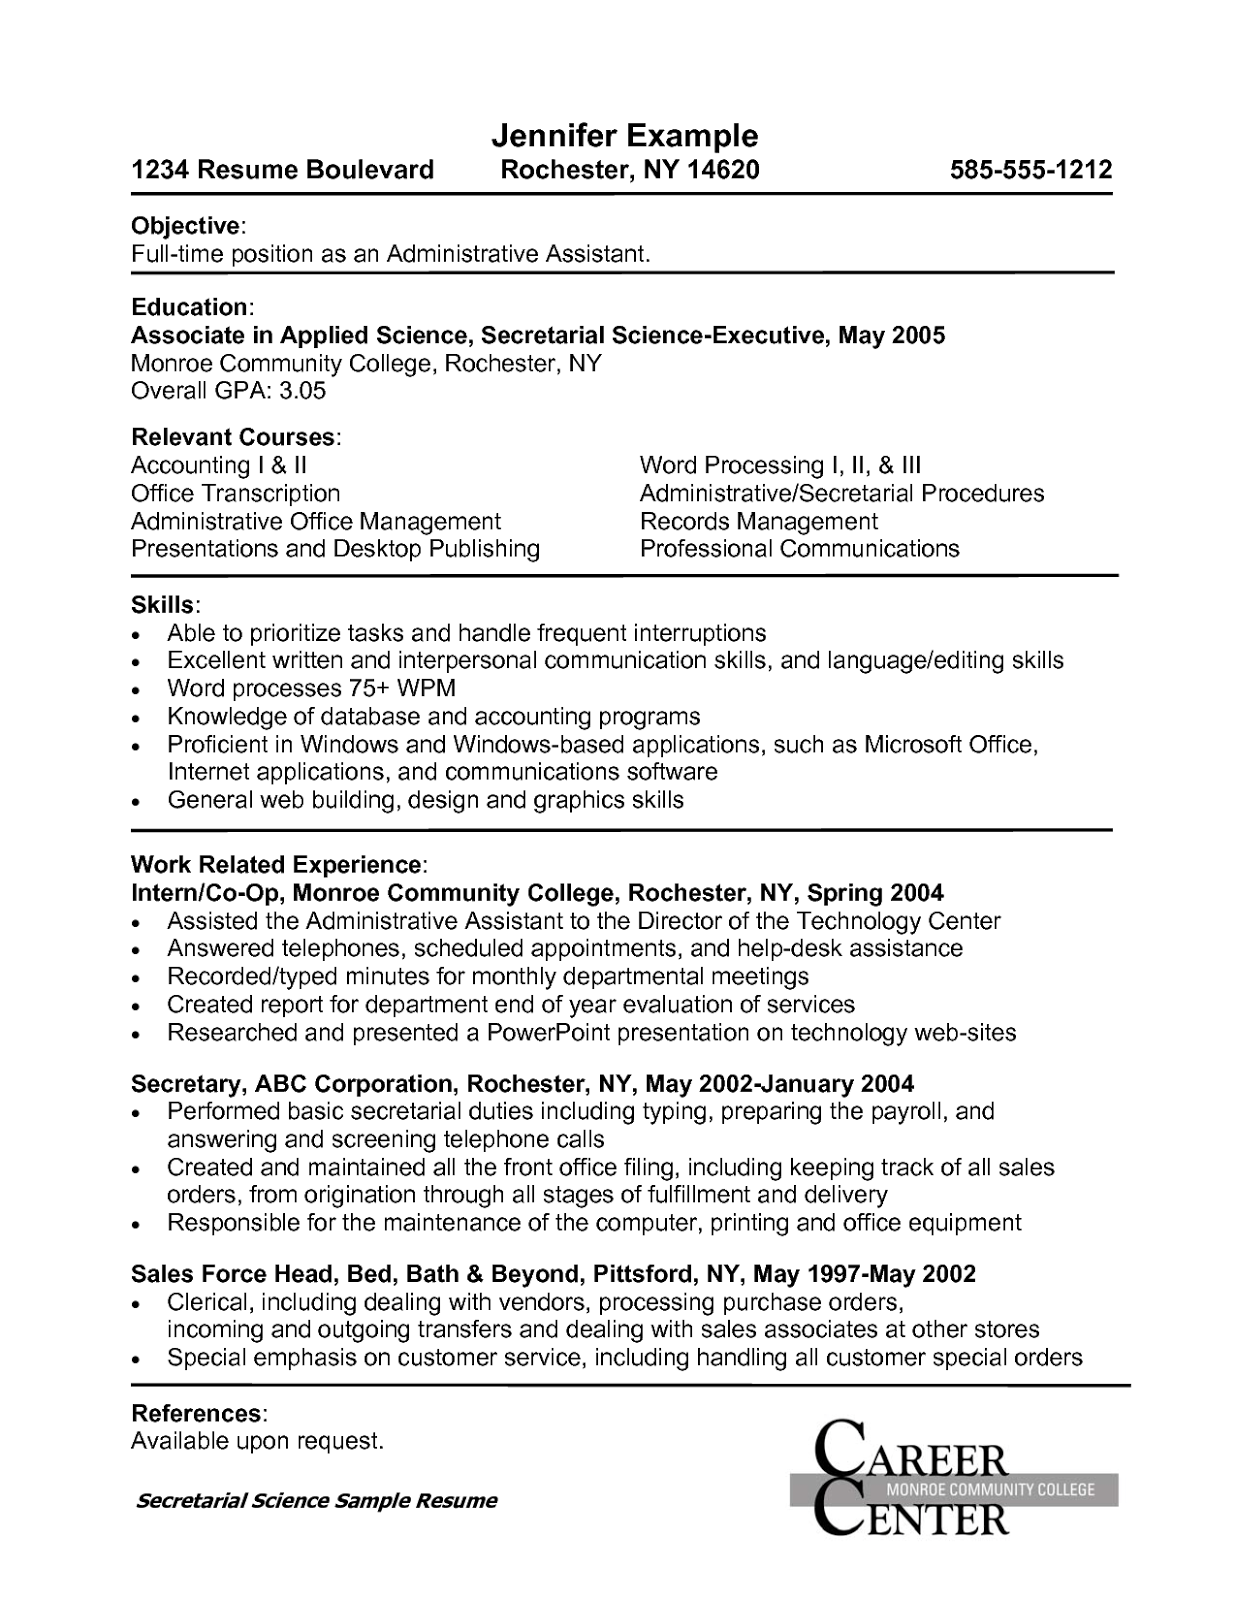 Resume examples for administrative jobs